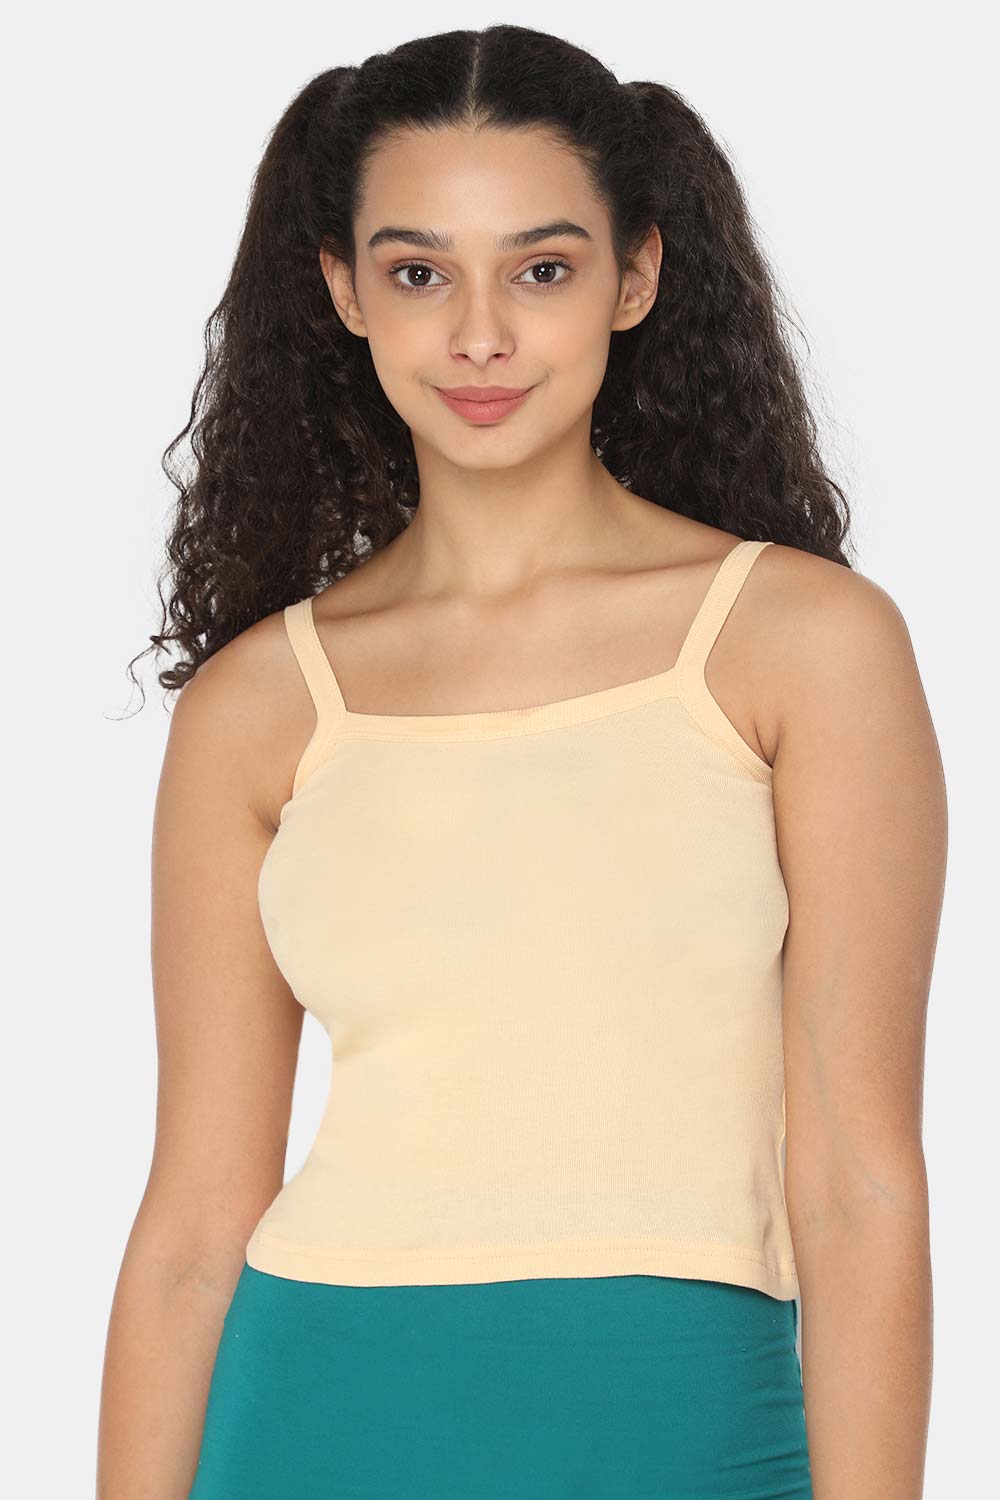 Intimacy Camisole-Slip Special Combo Pack - In01 - Pack of 3 - C66